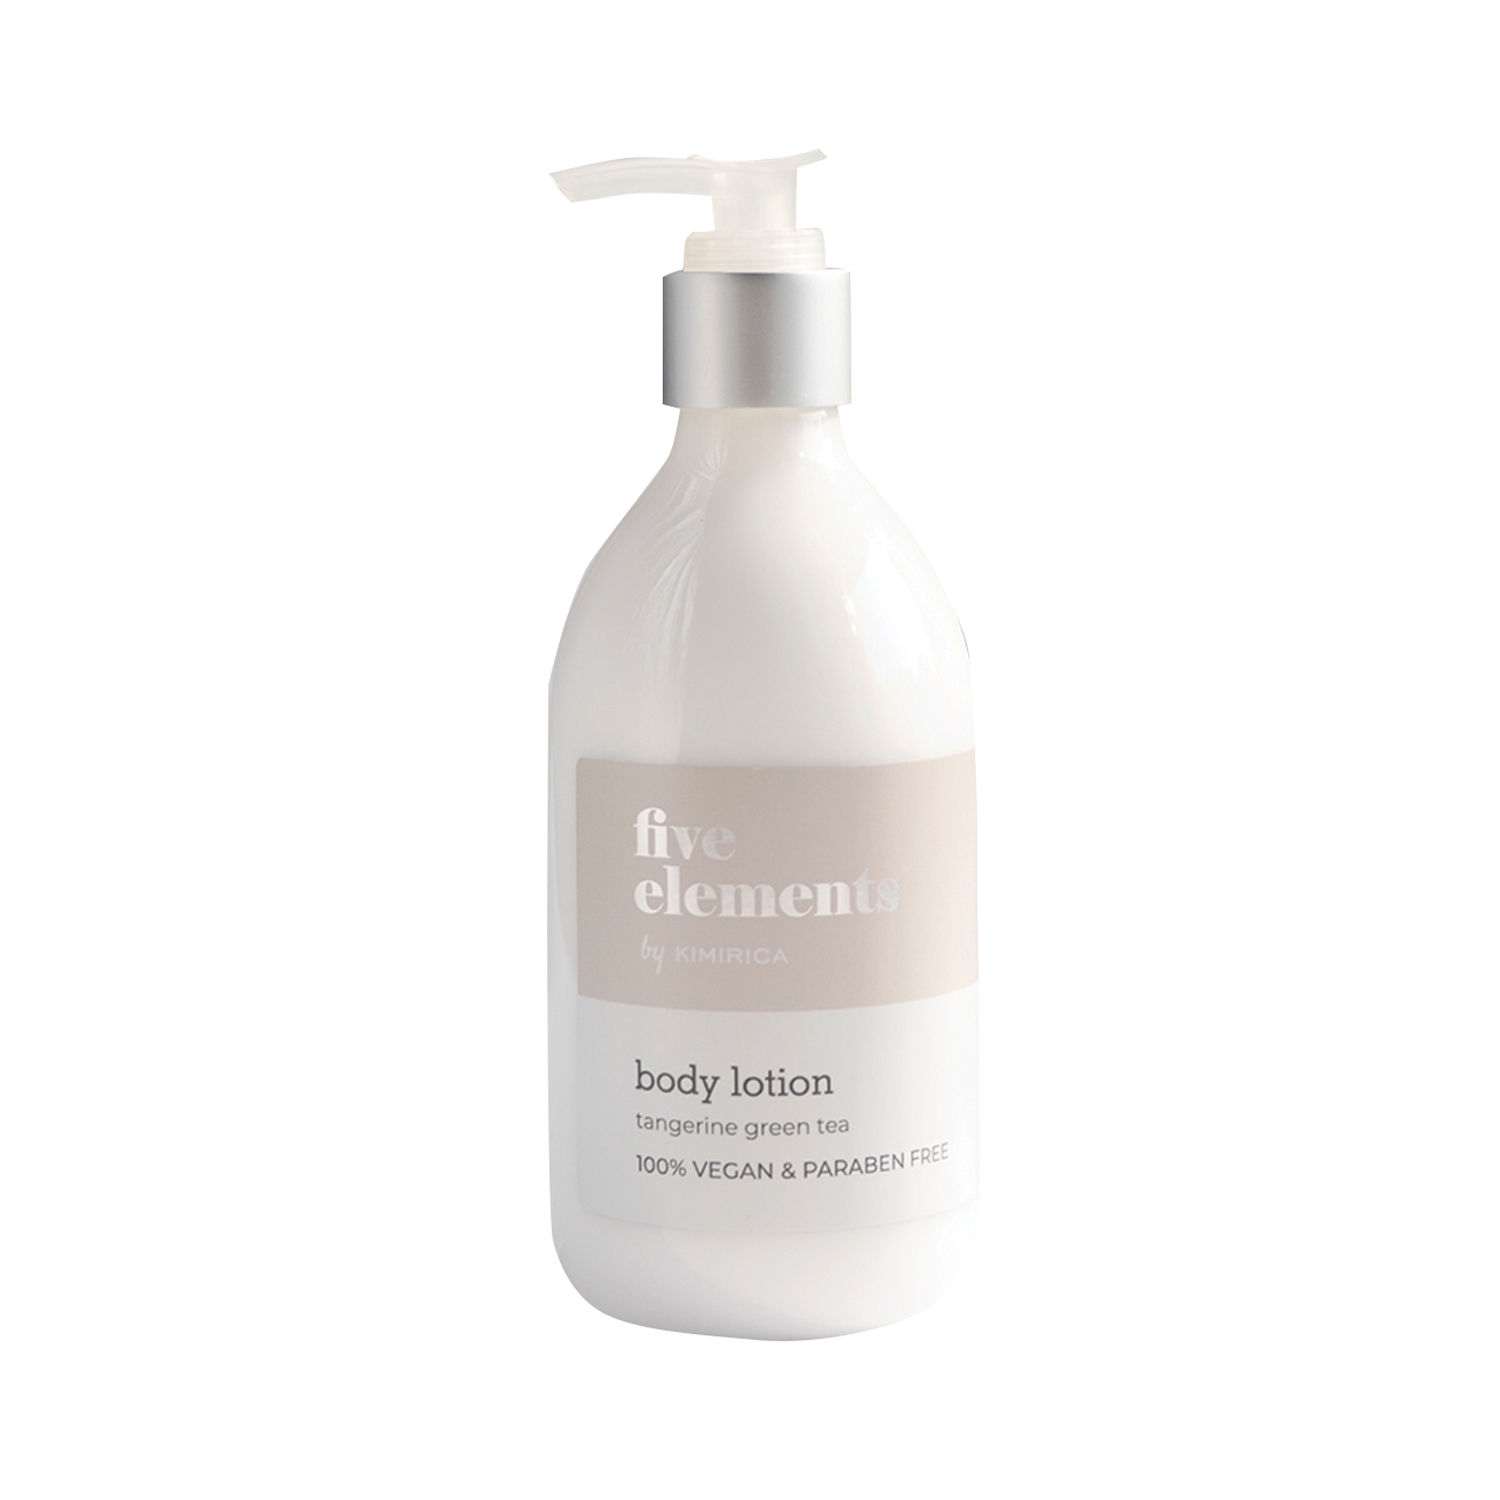 Kimirica | Kimirica Five Elements Body Lotion with Tangerine & Green Tea for All Skin Type Hydrating (300 ml)